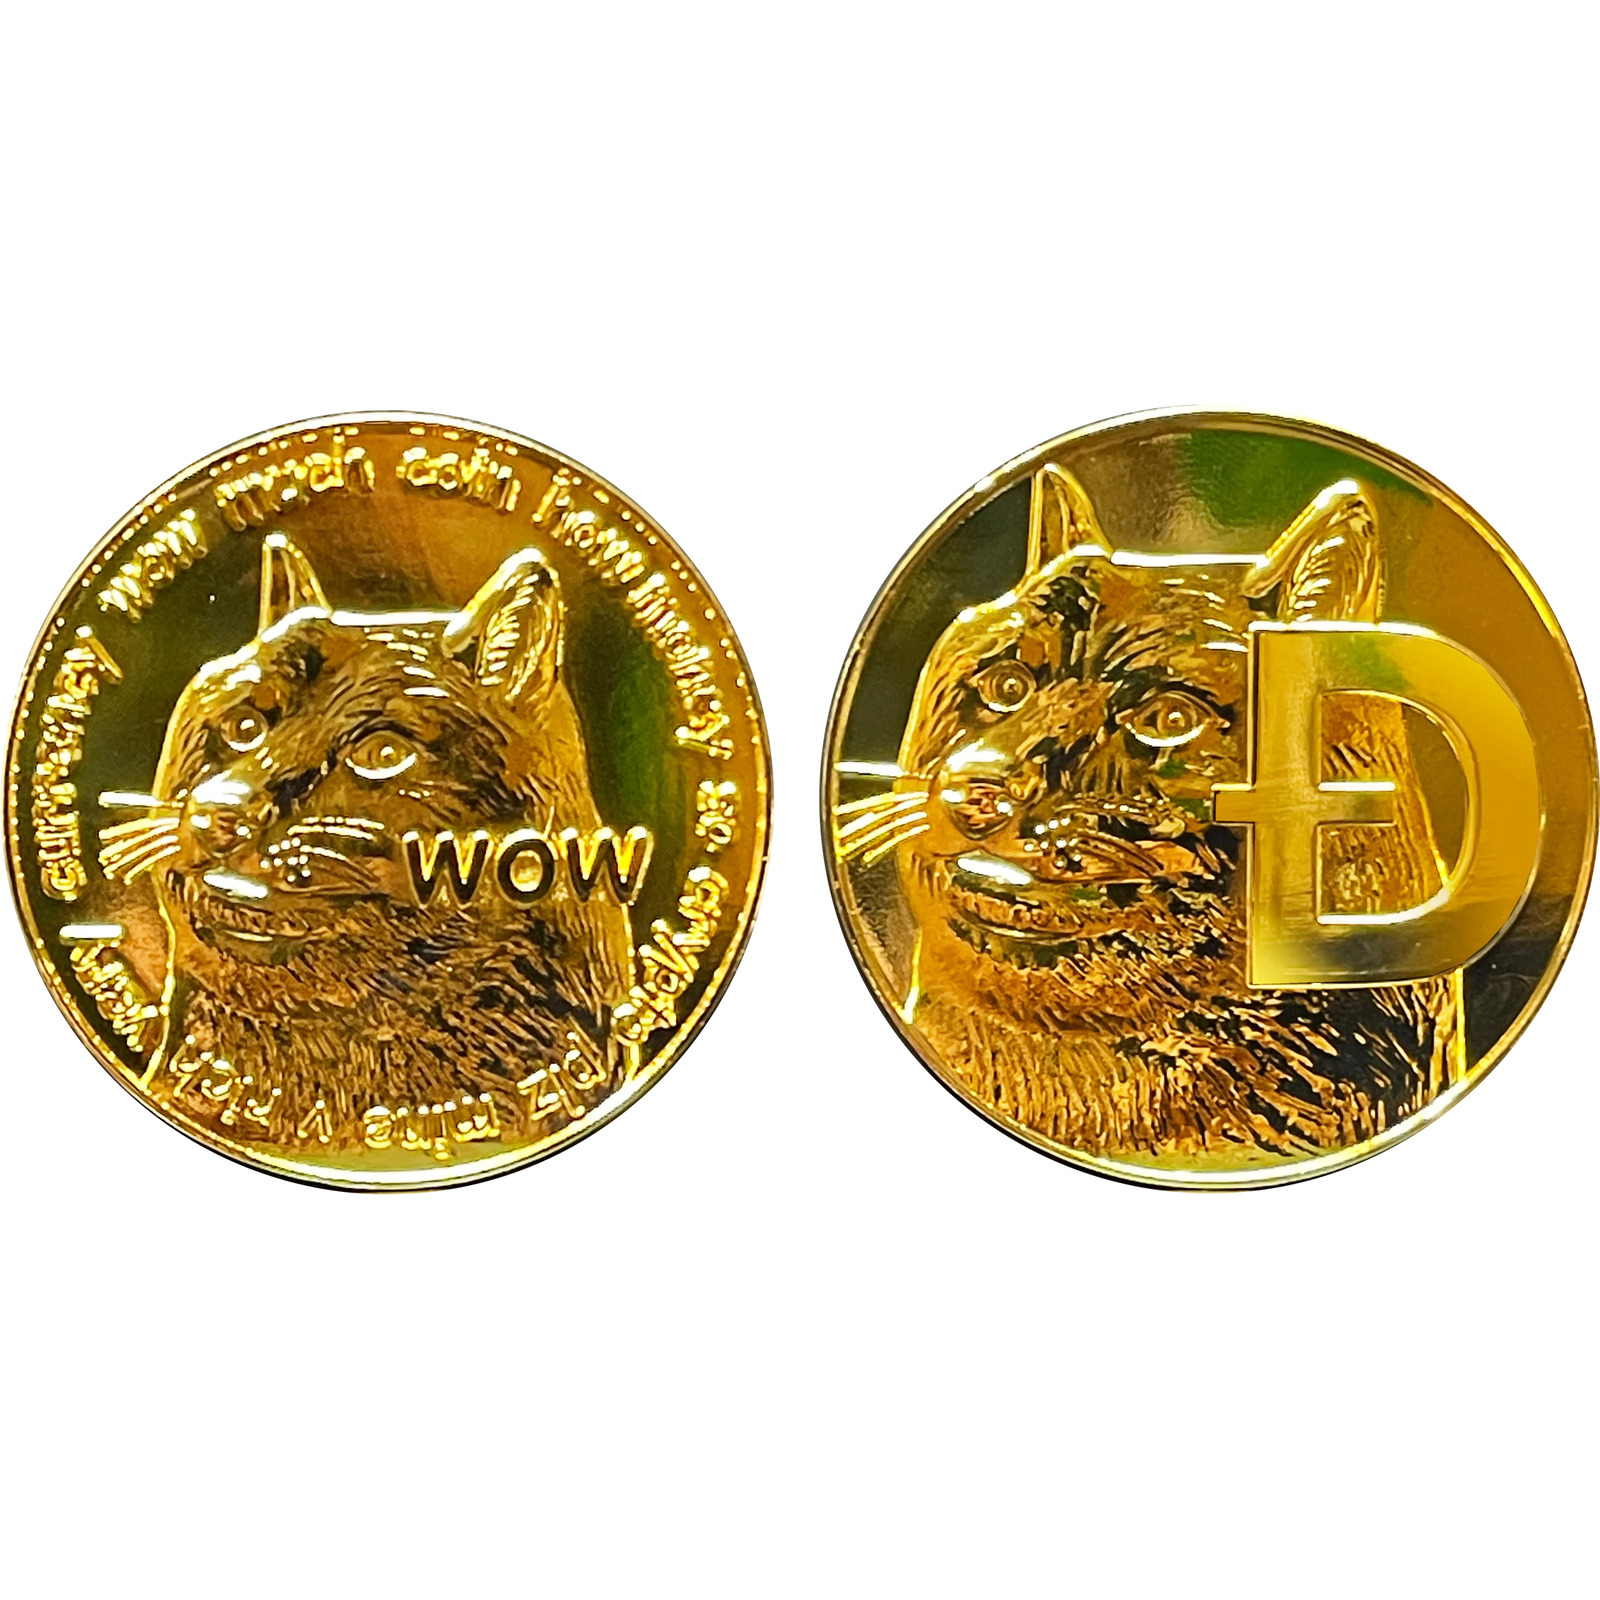 BL12-003 Dogecoin 2 oz doge Commemorative Challenge Coin Limited Edition Crypto